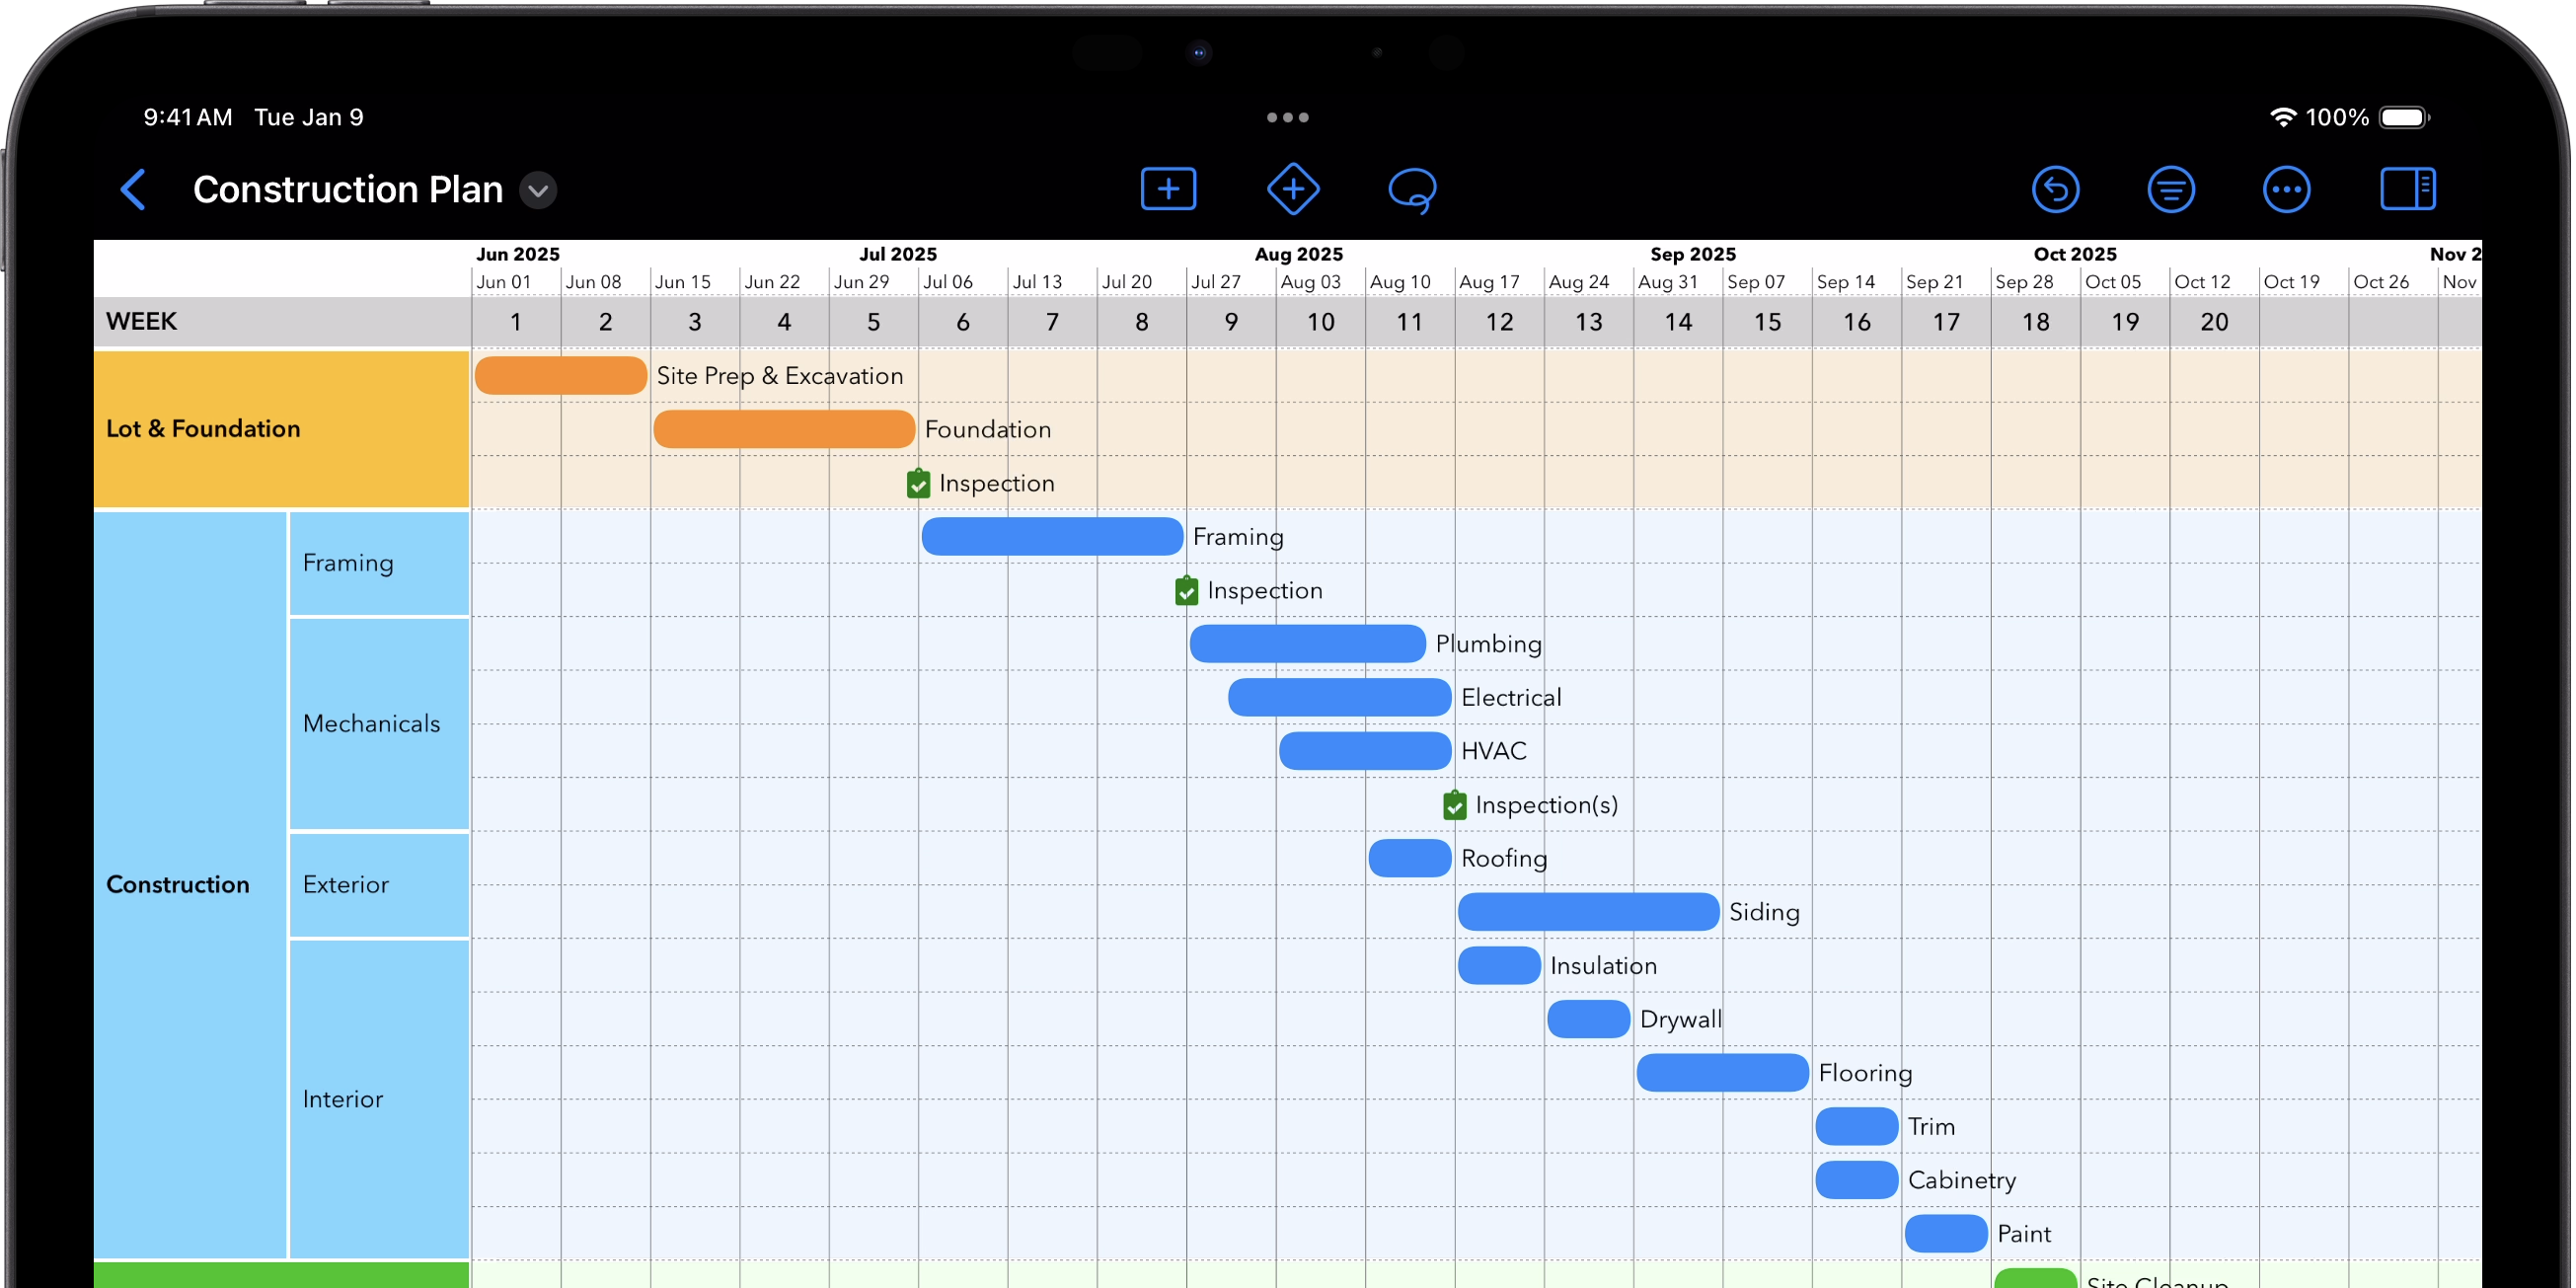 A screenshot of TimeStory for iPad within an iPad Pro (11-inch) bezel, showing a fictional Construction Plan timeline. On the left is a hierarchy of sections including Lot & Founcation, Construction, and more, with multiple subsections under Construction. In the timeline body, each section contains a series of tasks mapped out in time.